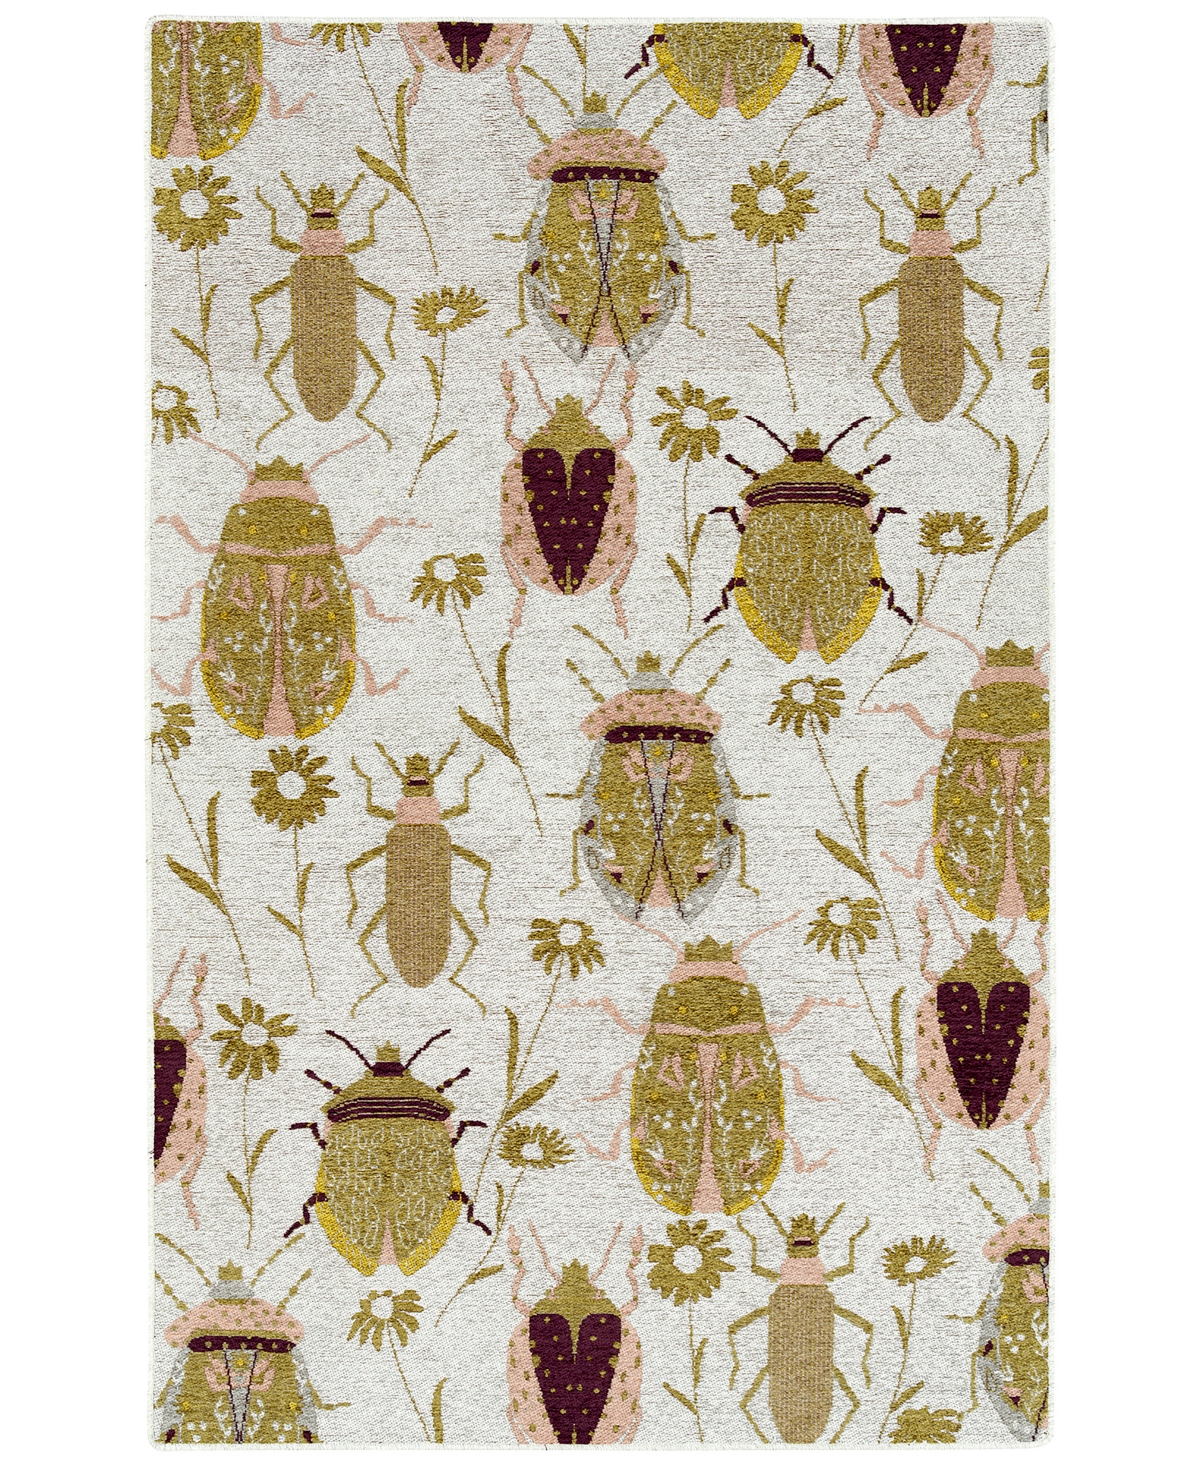 Hilary Farr Critter Comforts Hcc03-78 3' X 5' Area Rug In Gold-tone